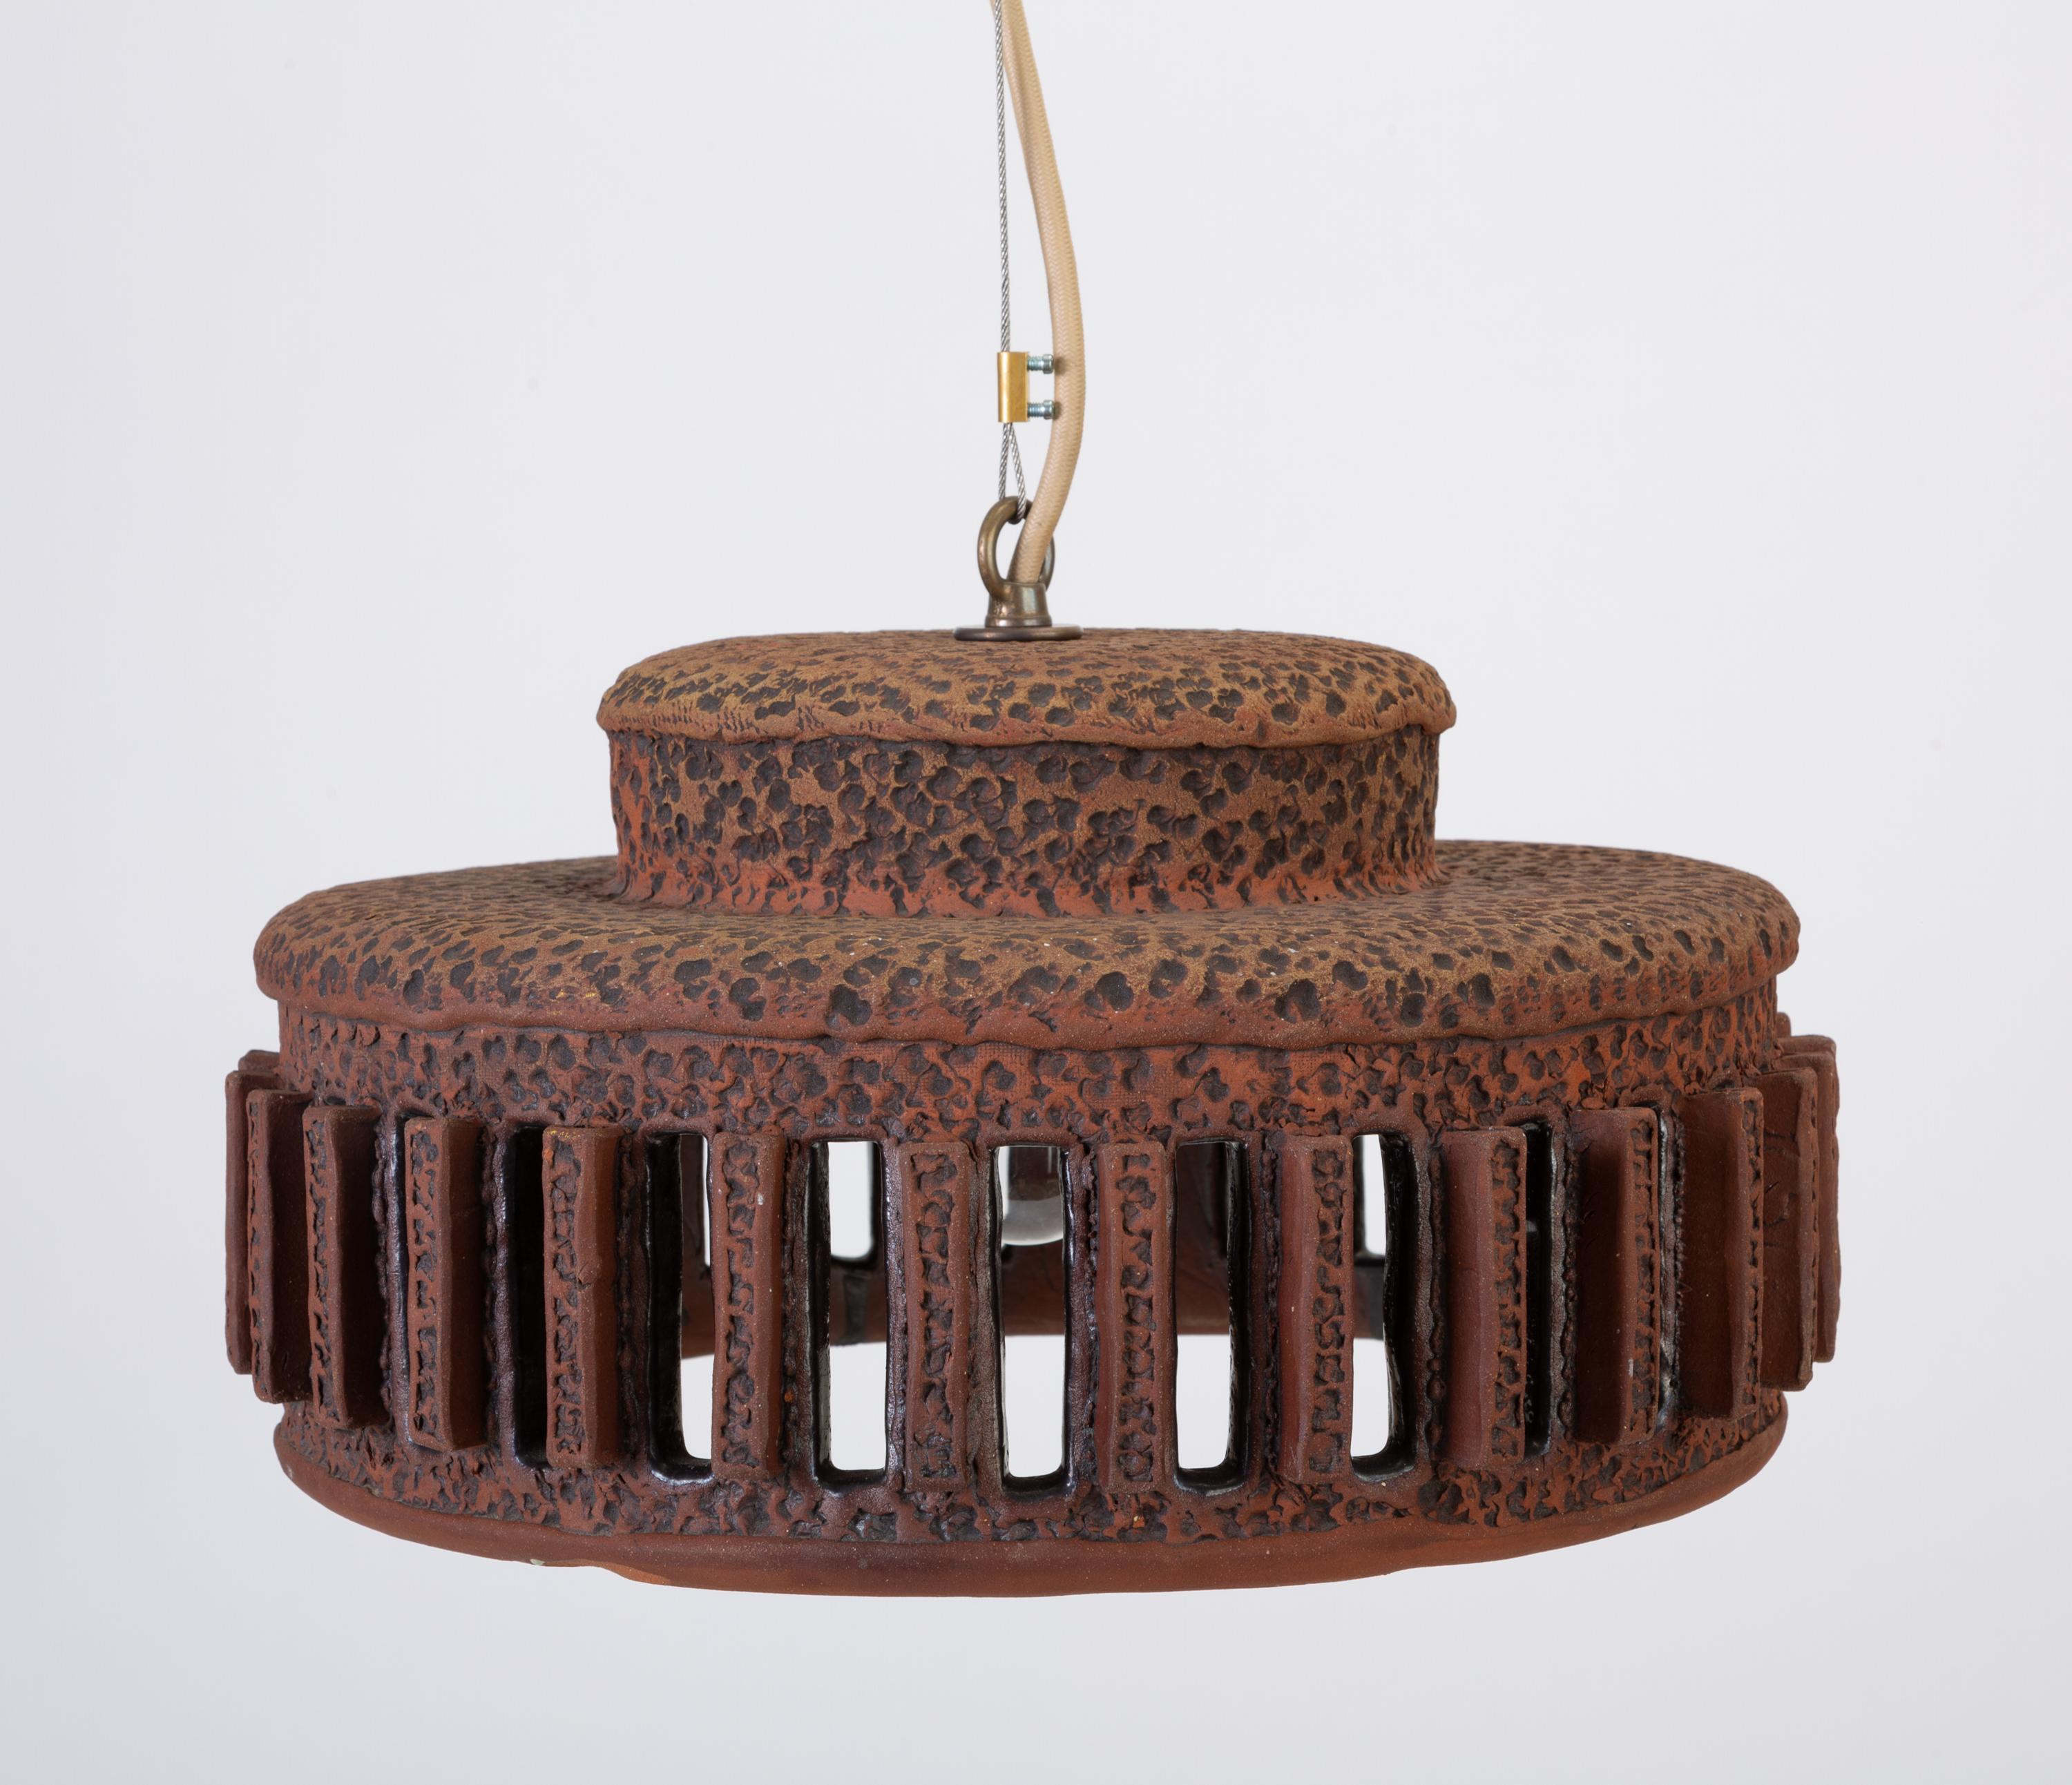 A unique stoneware pendant lamp with architectural, crenellated vents around the side. The lamp is made from a textured red-brown clay with handmade debossed and sgraffito detailing. This example has a low, wide drum shape with raised vents. The